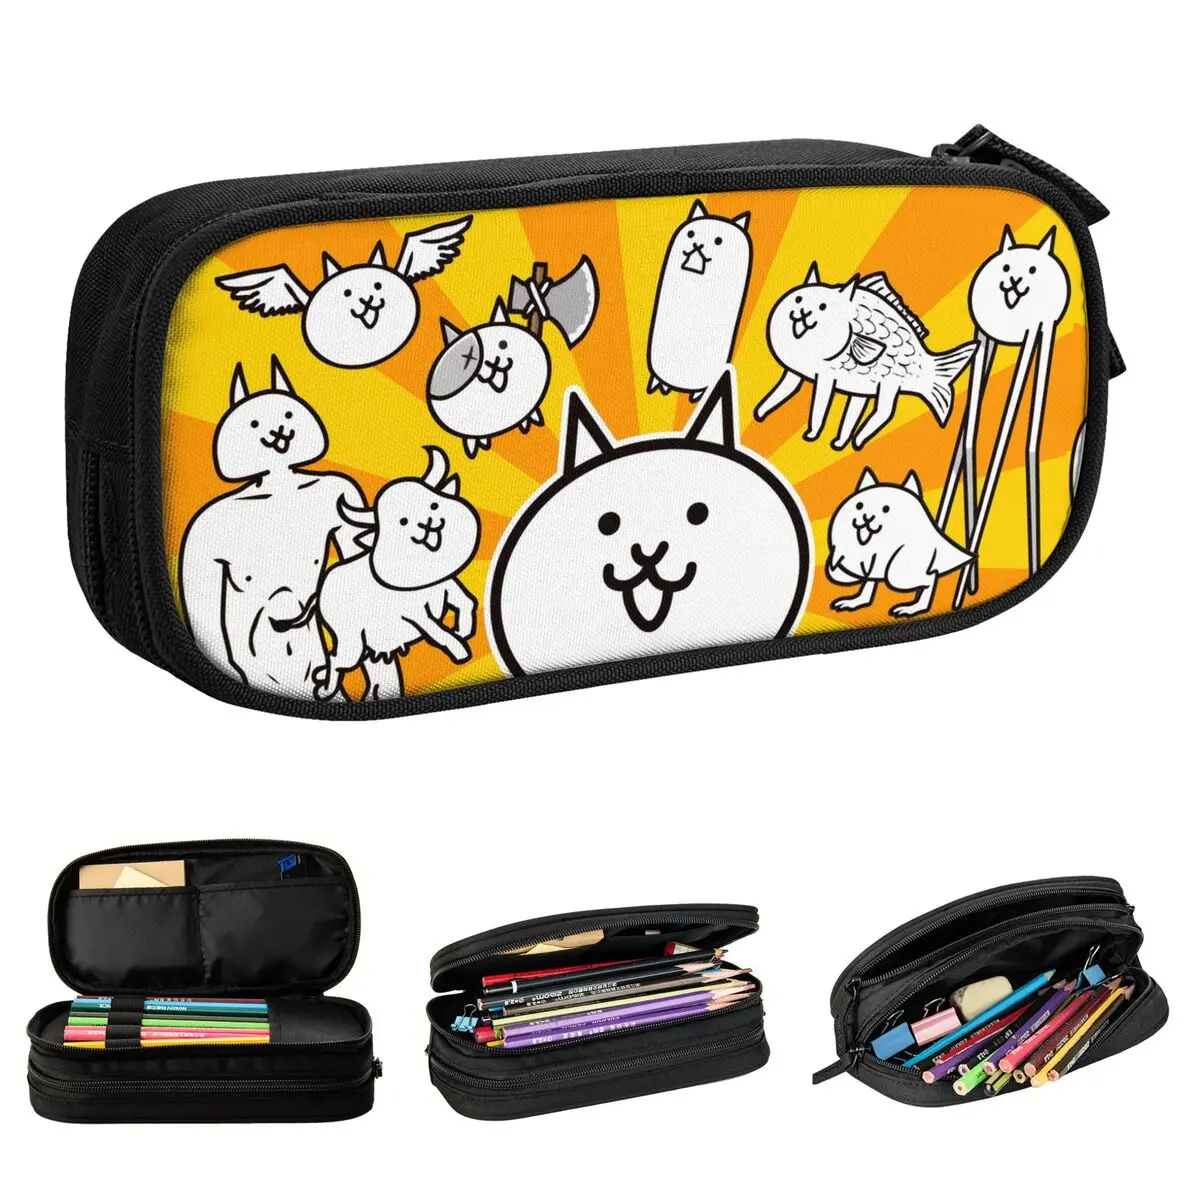 

Cartoon Game Pencil Case The Battle Cats Pencilcases Pen Holder for Student Large Storage Bags Students School Gifts Stationery